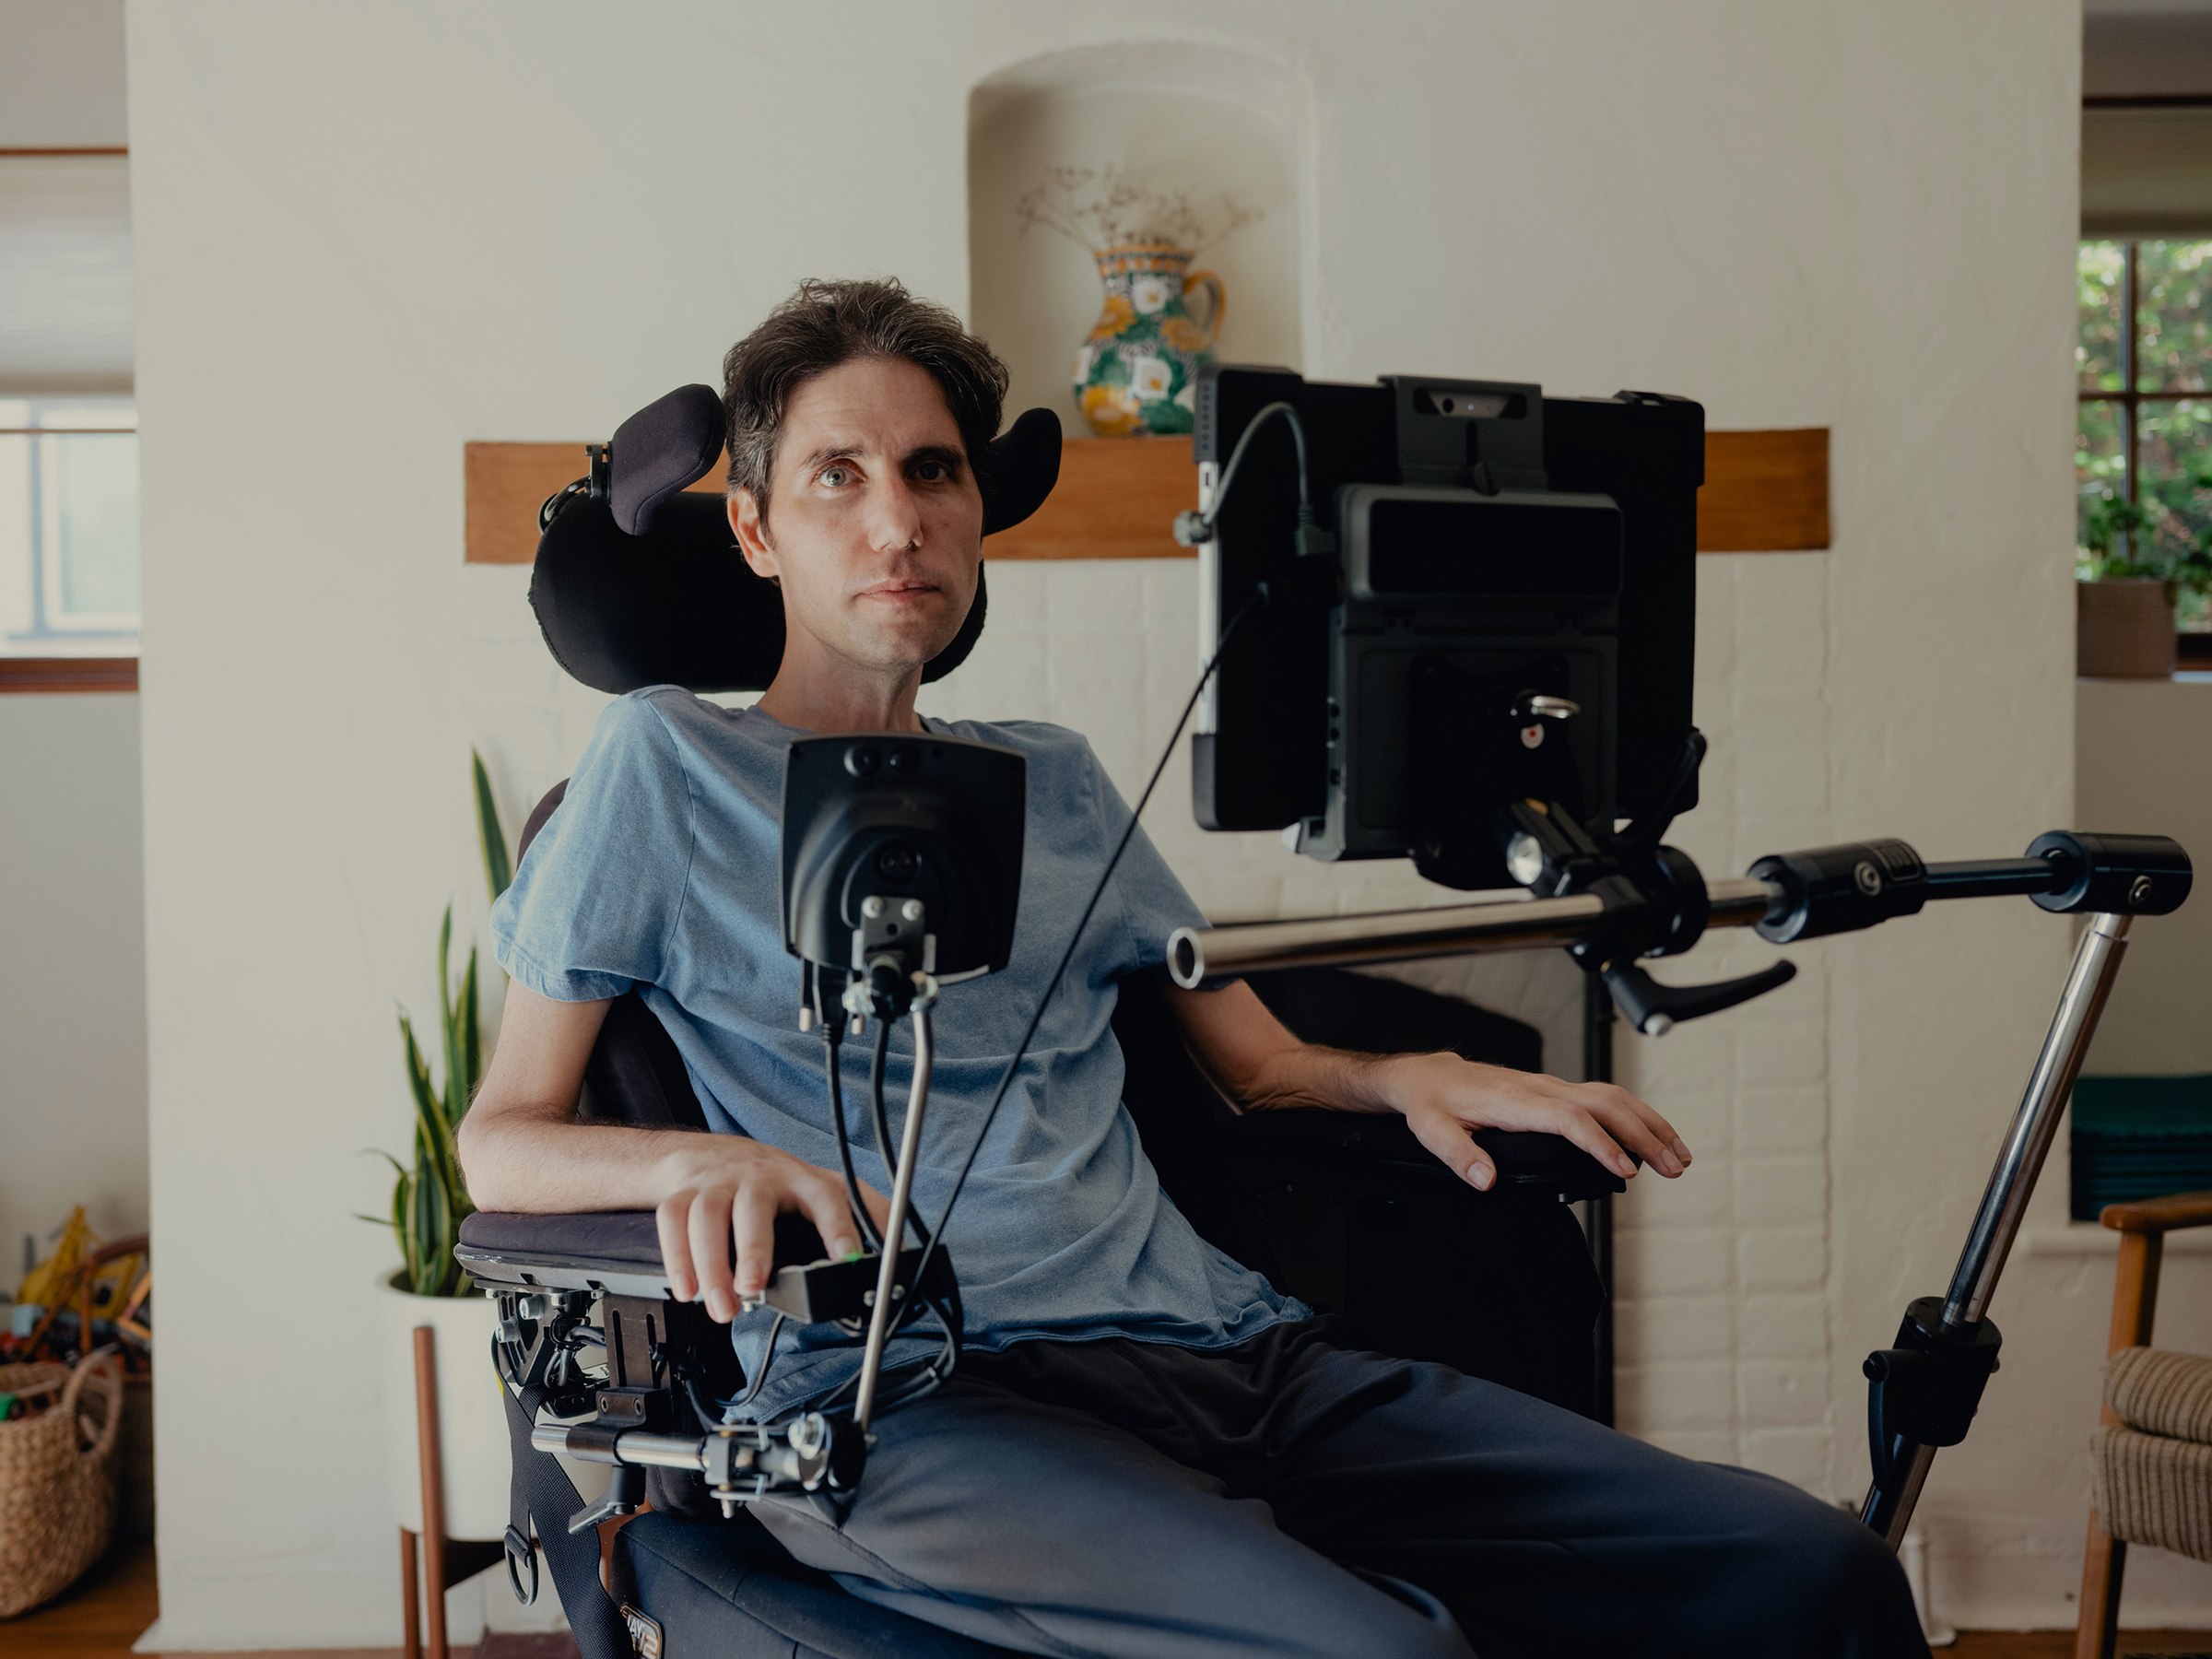 ALS "made me really see what a moral abomi-nation our health care system is." — Ady Barkan, health care activist